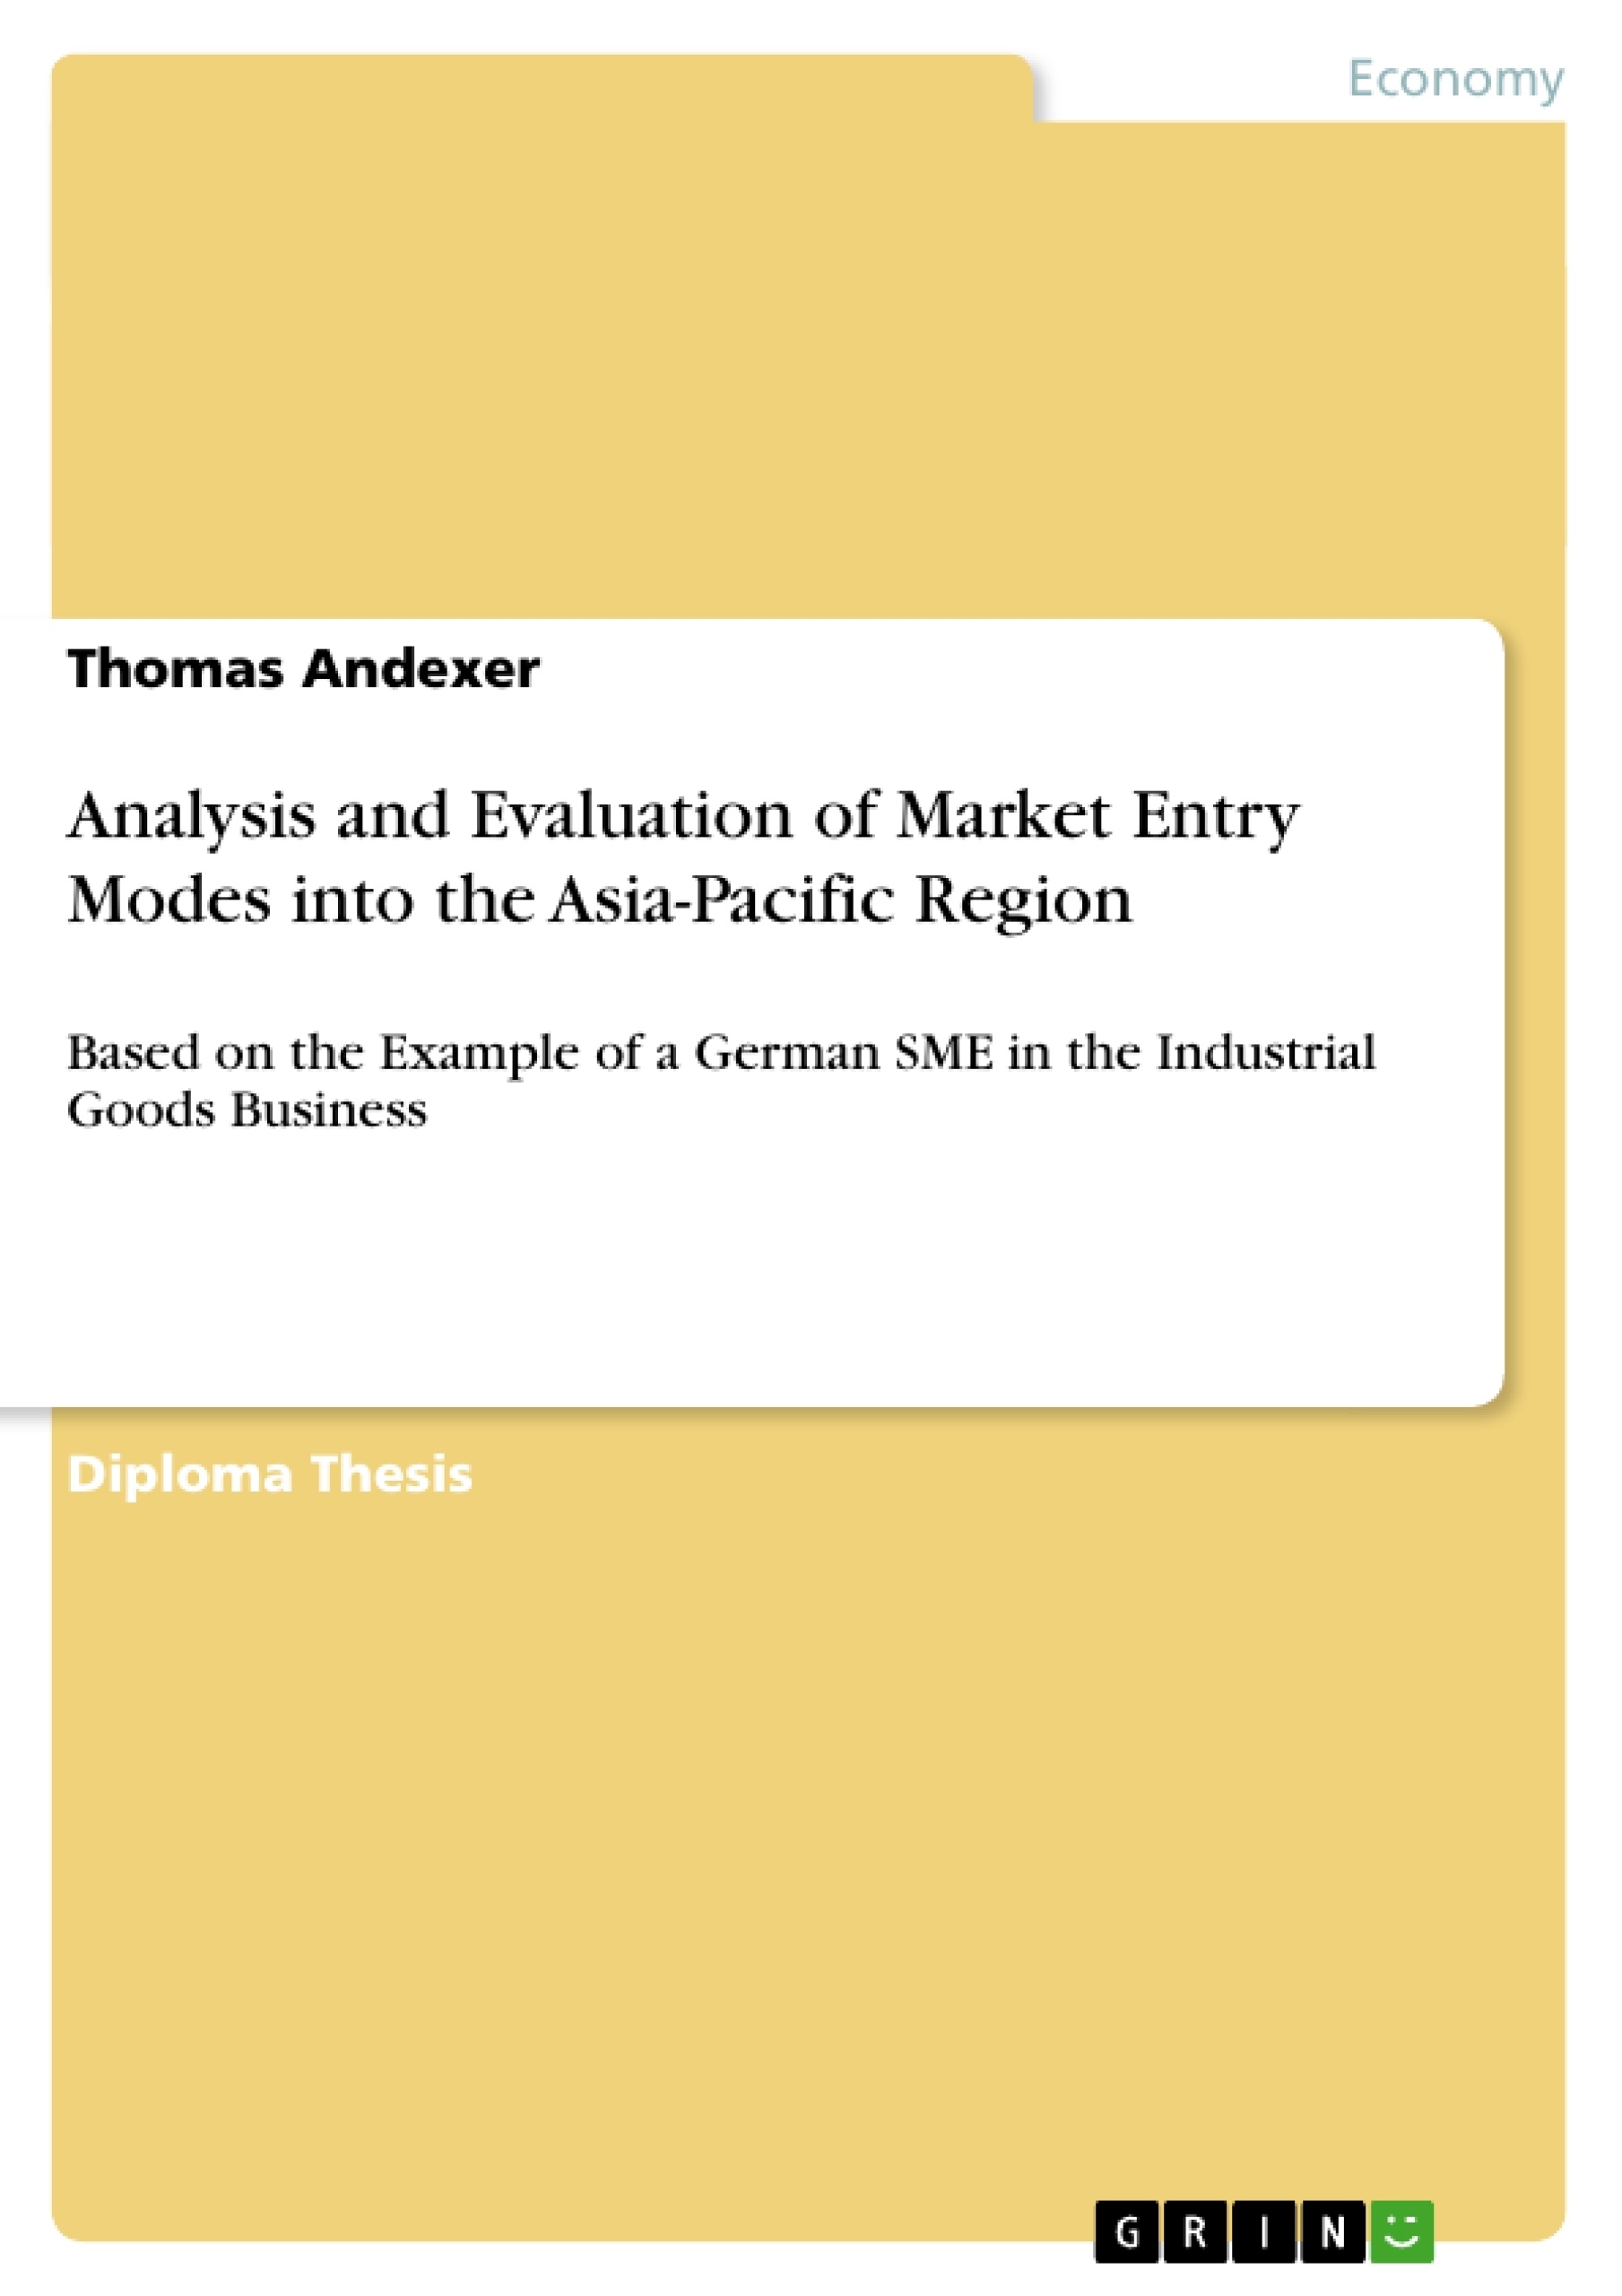 Título: Analysis and Evaluation of Market Entry Modes into the Asia-Pacific Region